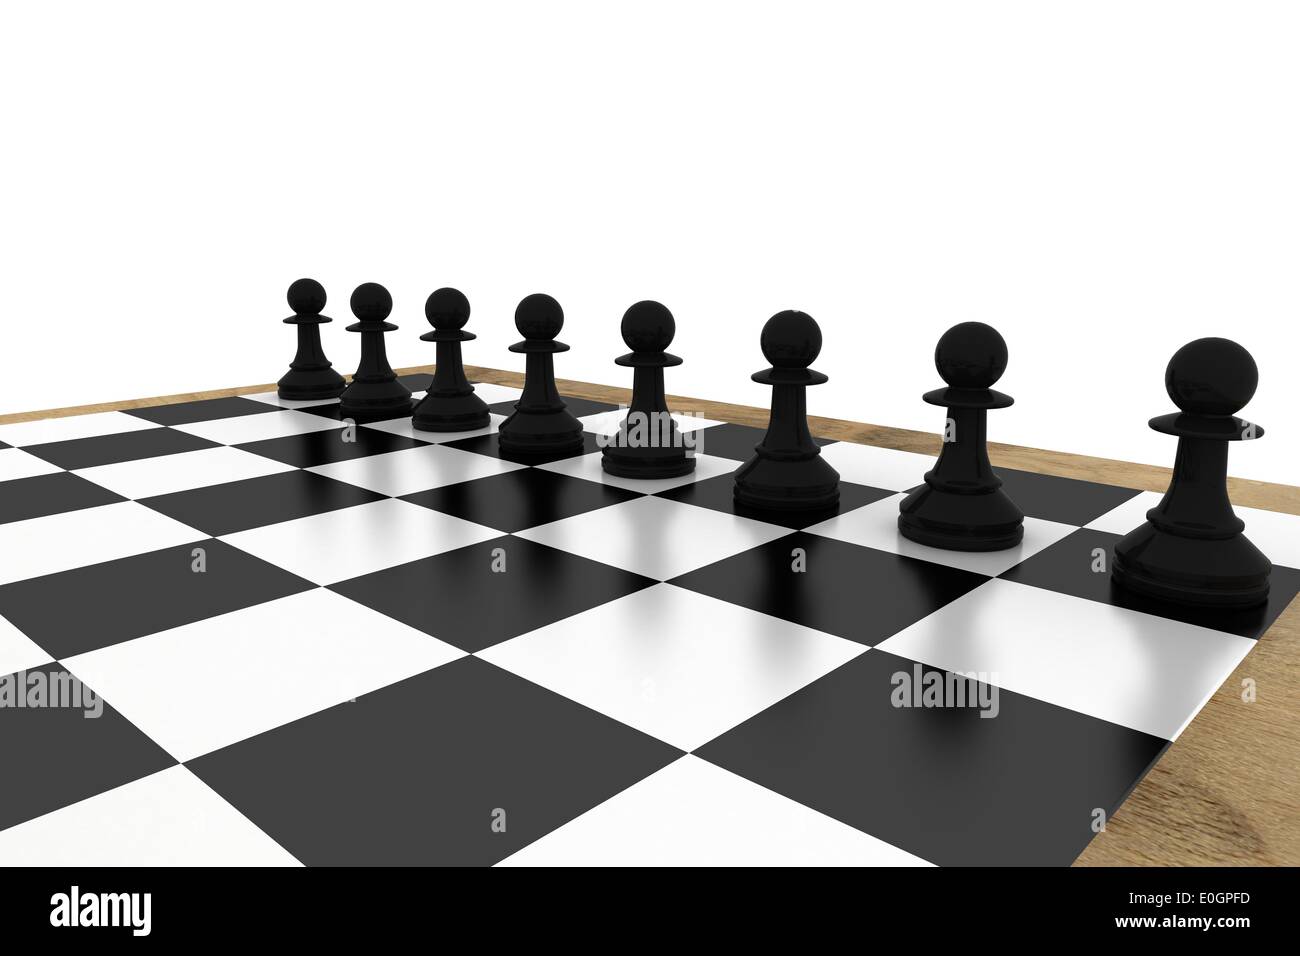 Black chess pawns on board Stock Photo